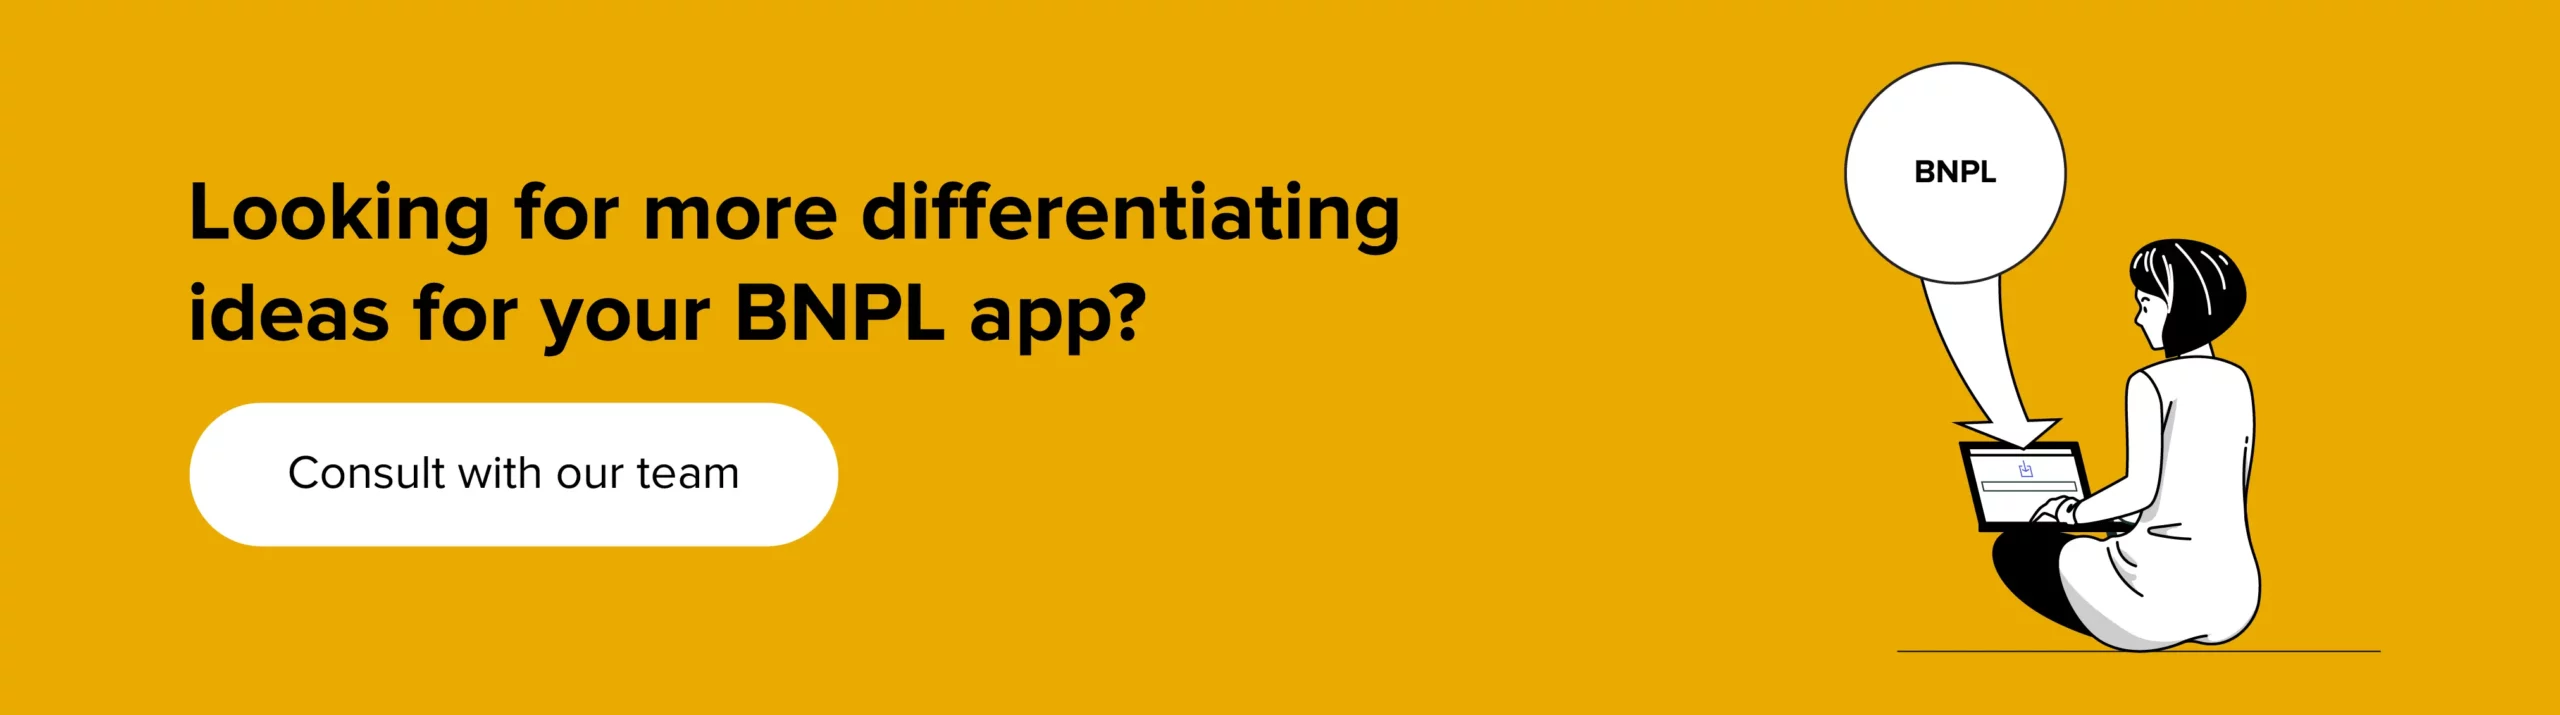 Get more differentiating ideas for your BNPL app